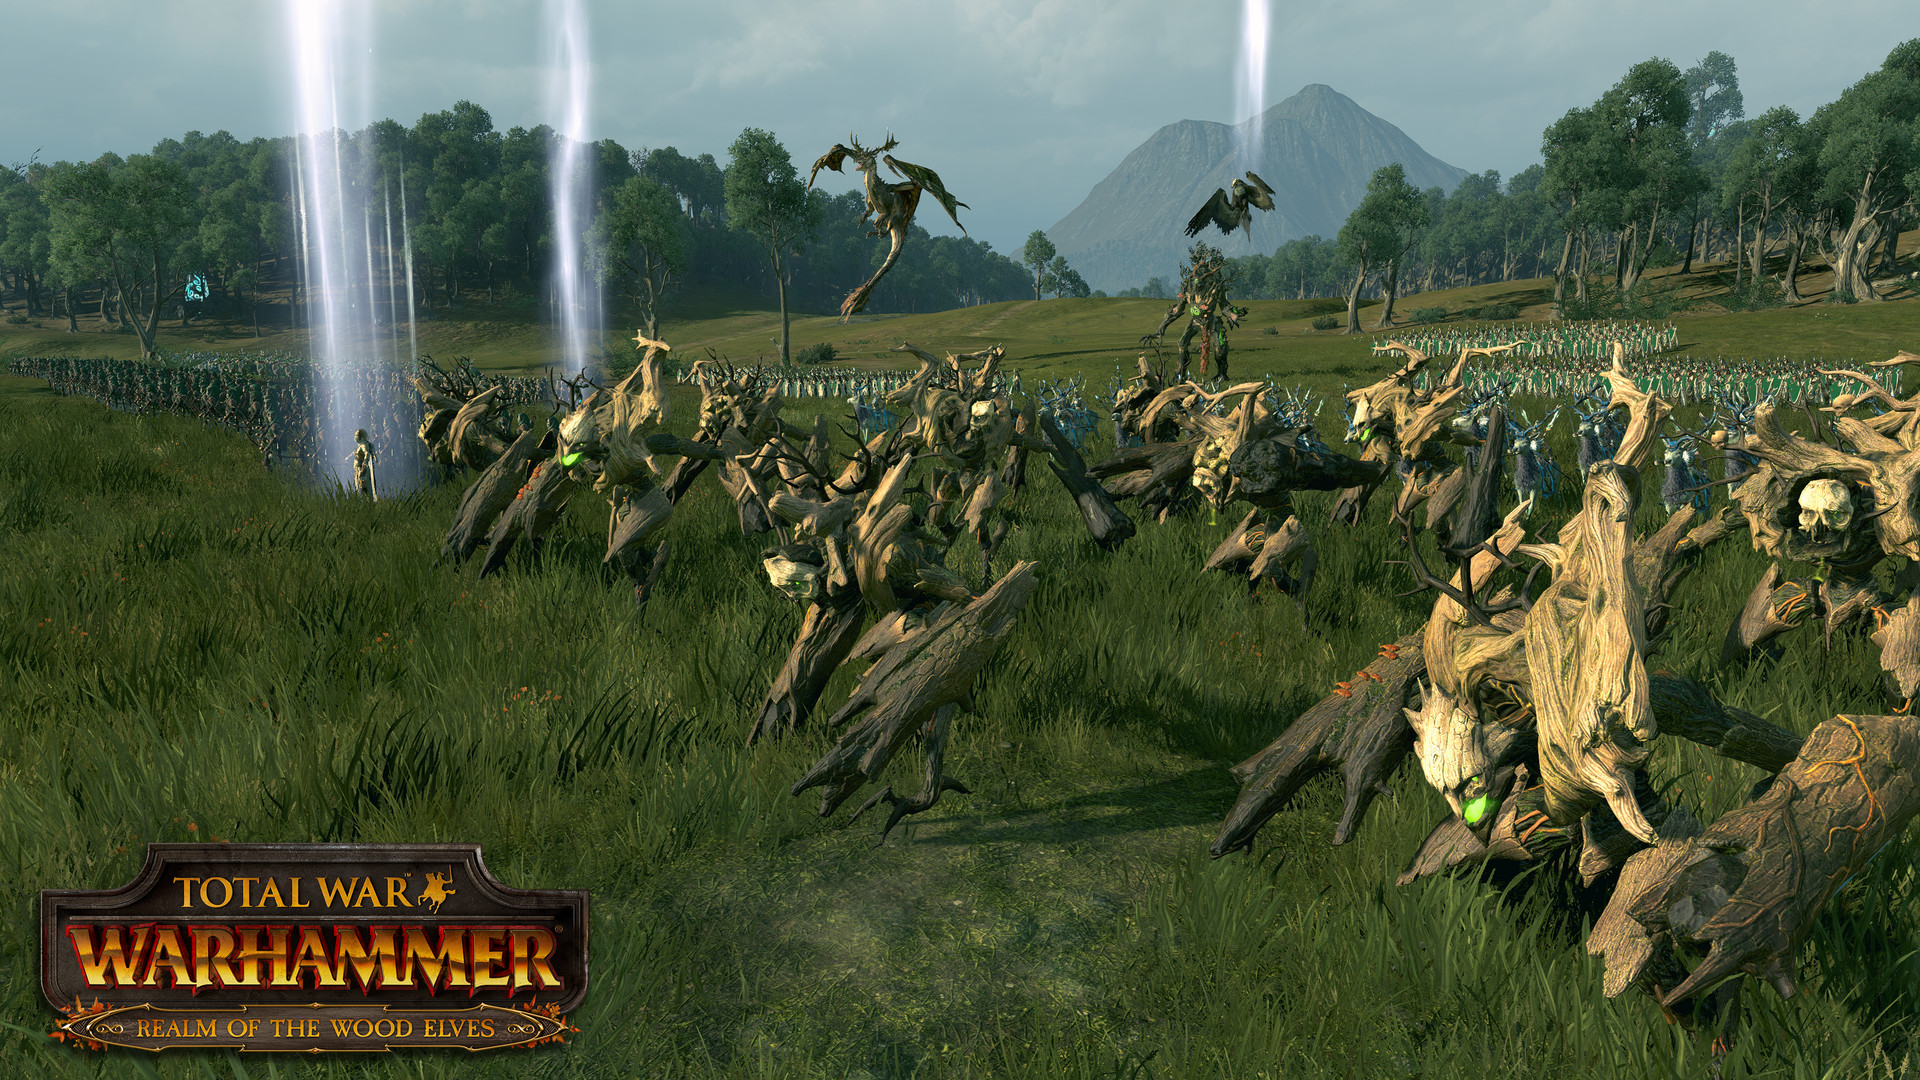 Save 50% on Total War: WARHAMMER - Realm of The Wood Elves on Steam